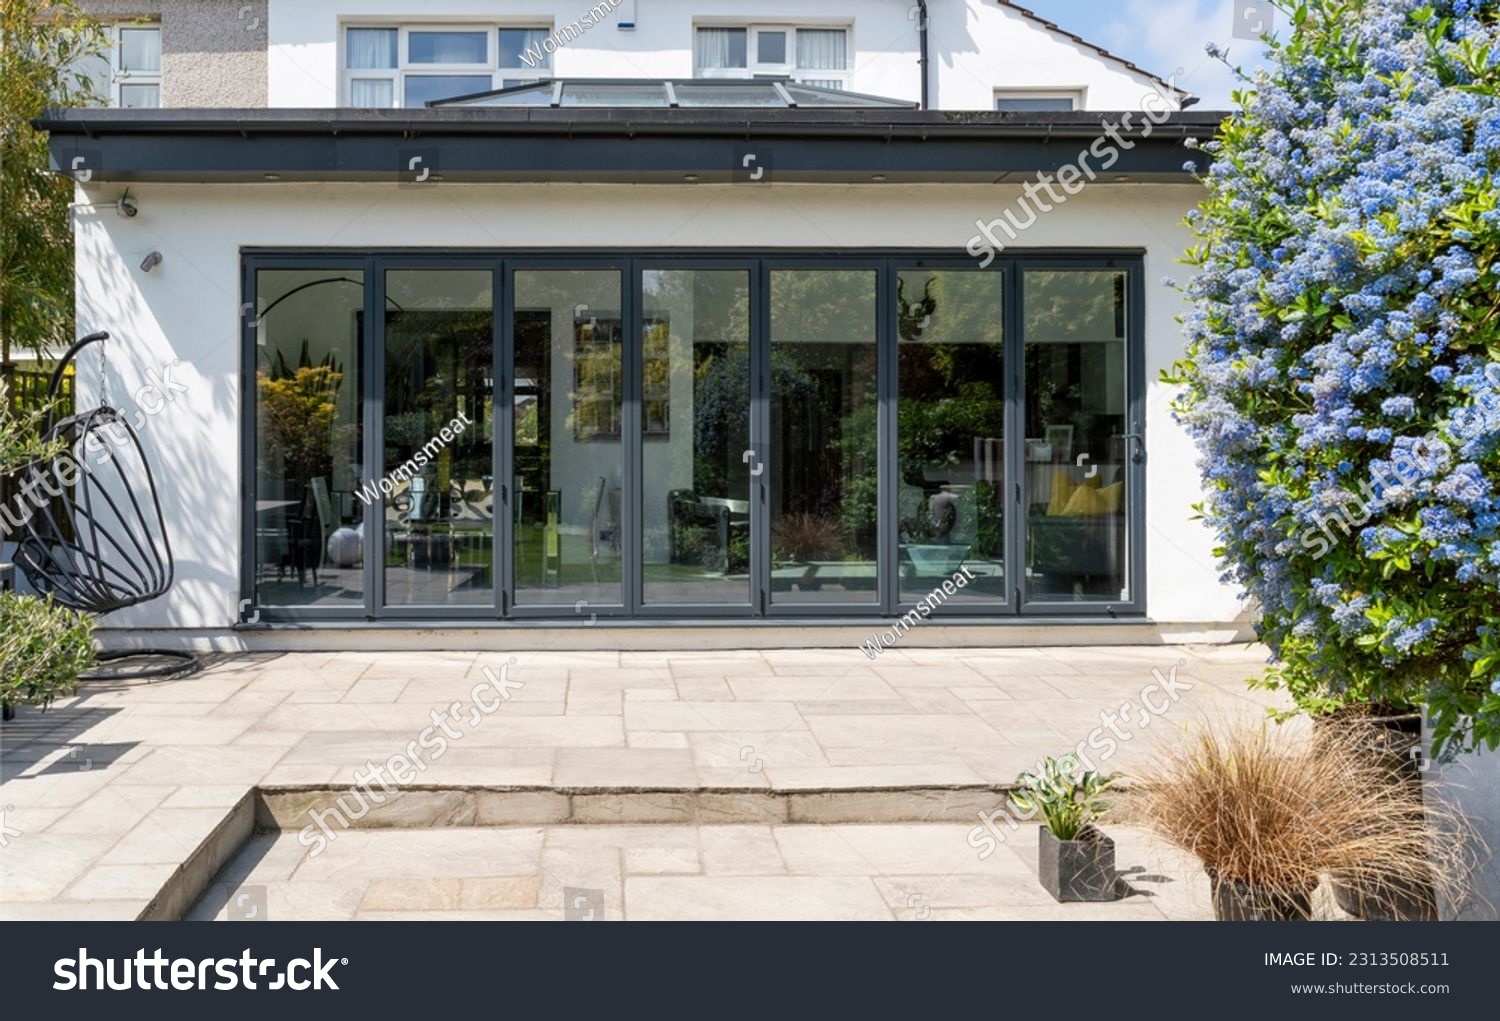 Stylish, closed, bifold doors with plants in spring, summer, revealing interior of a designer, lifestyle, kitchen diner room. Indian sandstone patio. #2313508511